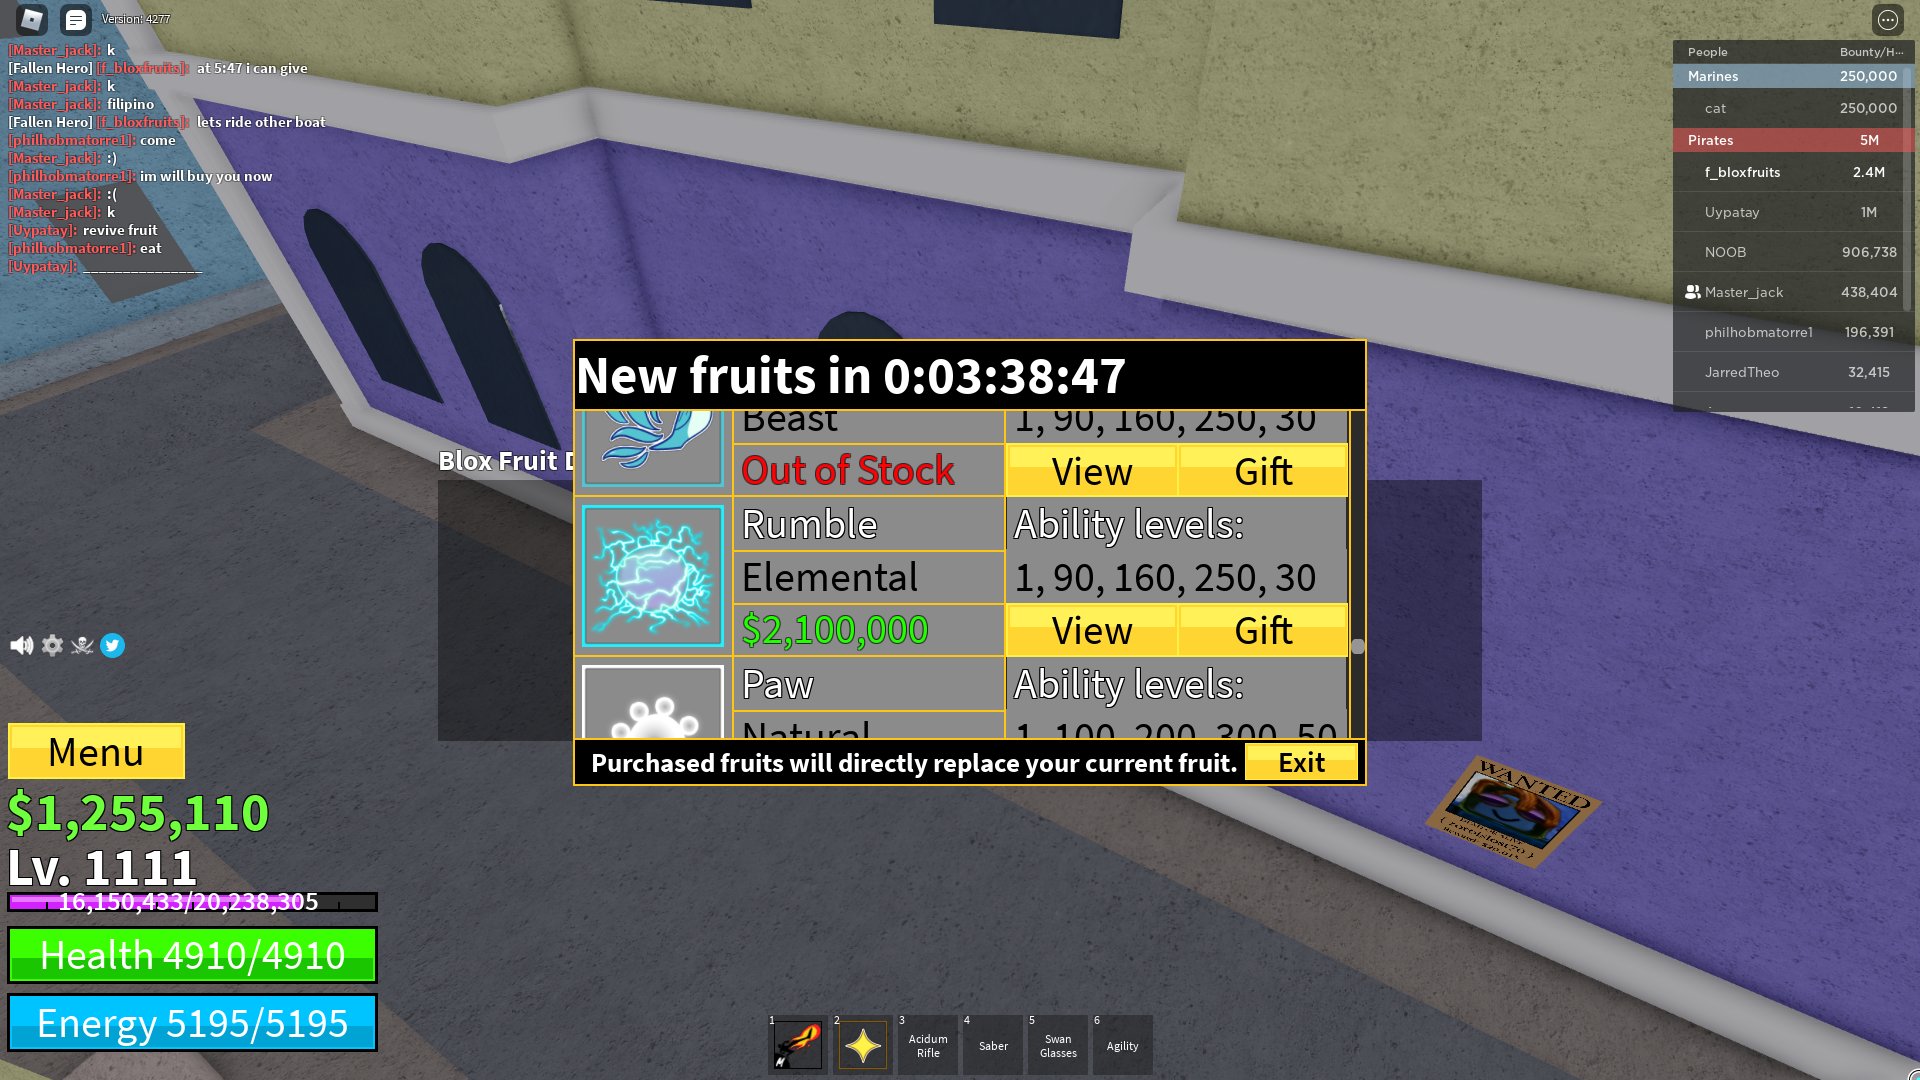 Blox Fruits STOCK NOW